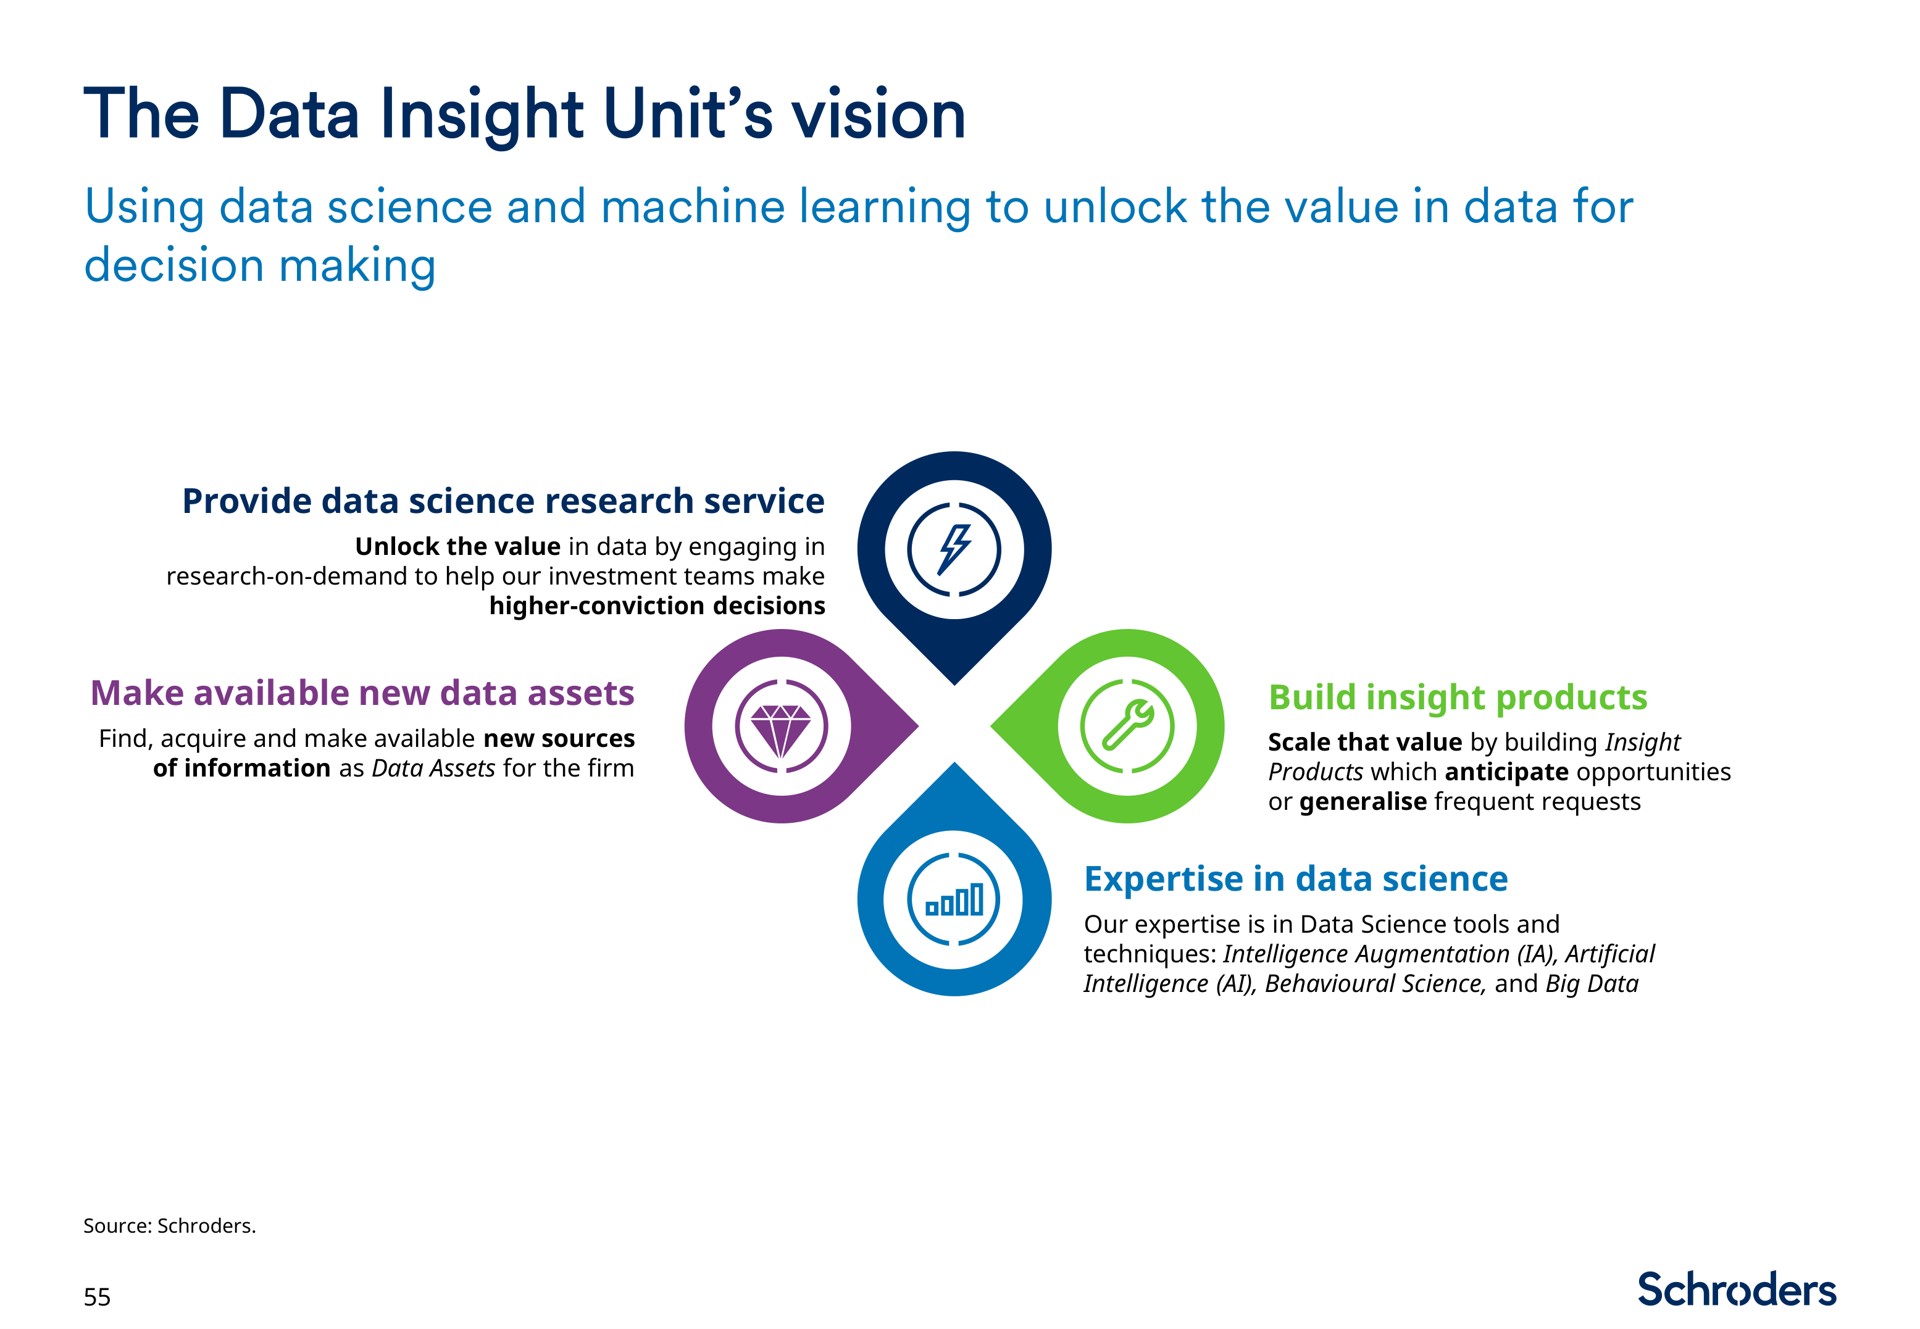 the data insight unit vision | Schroders